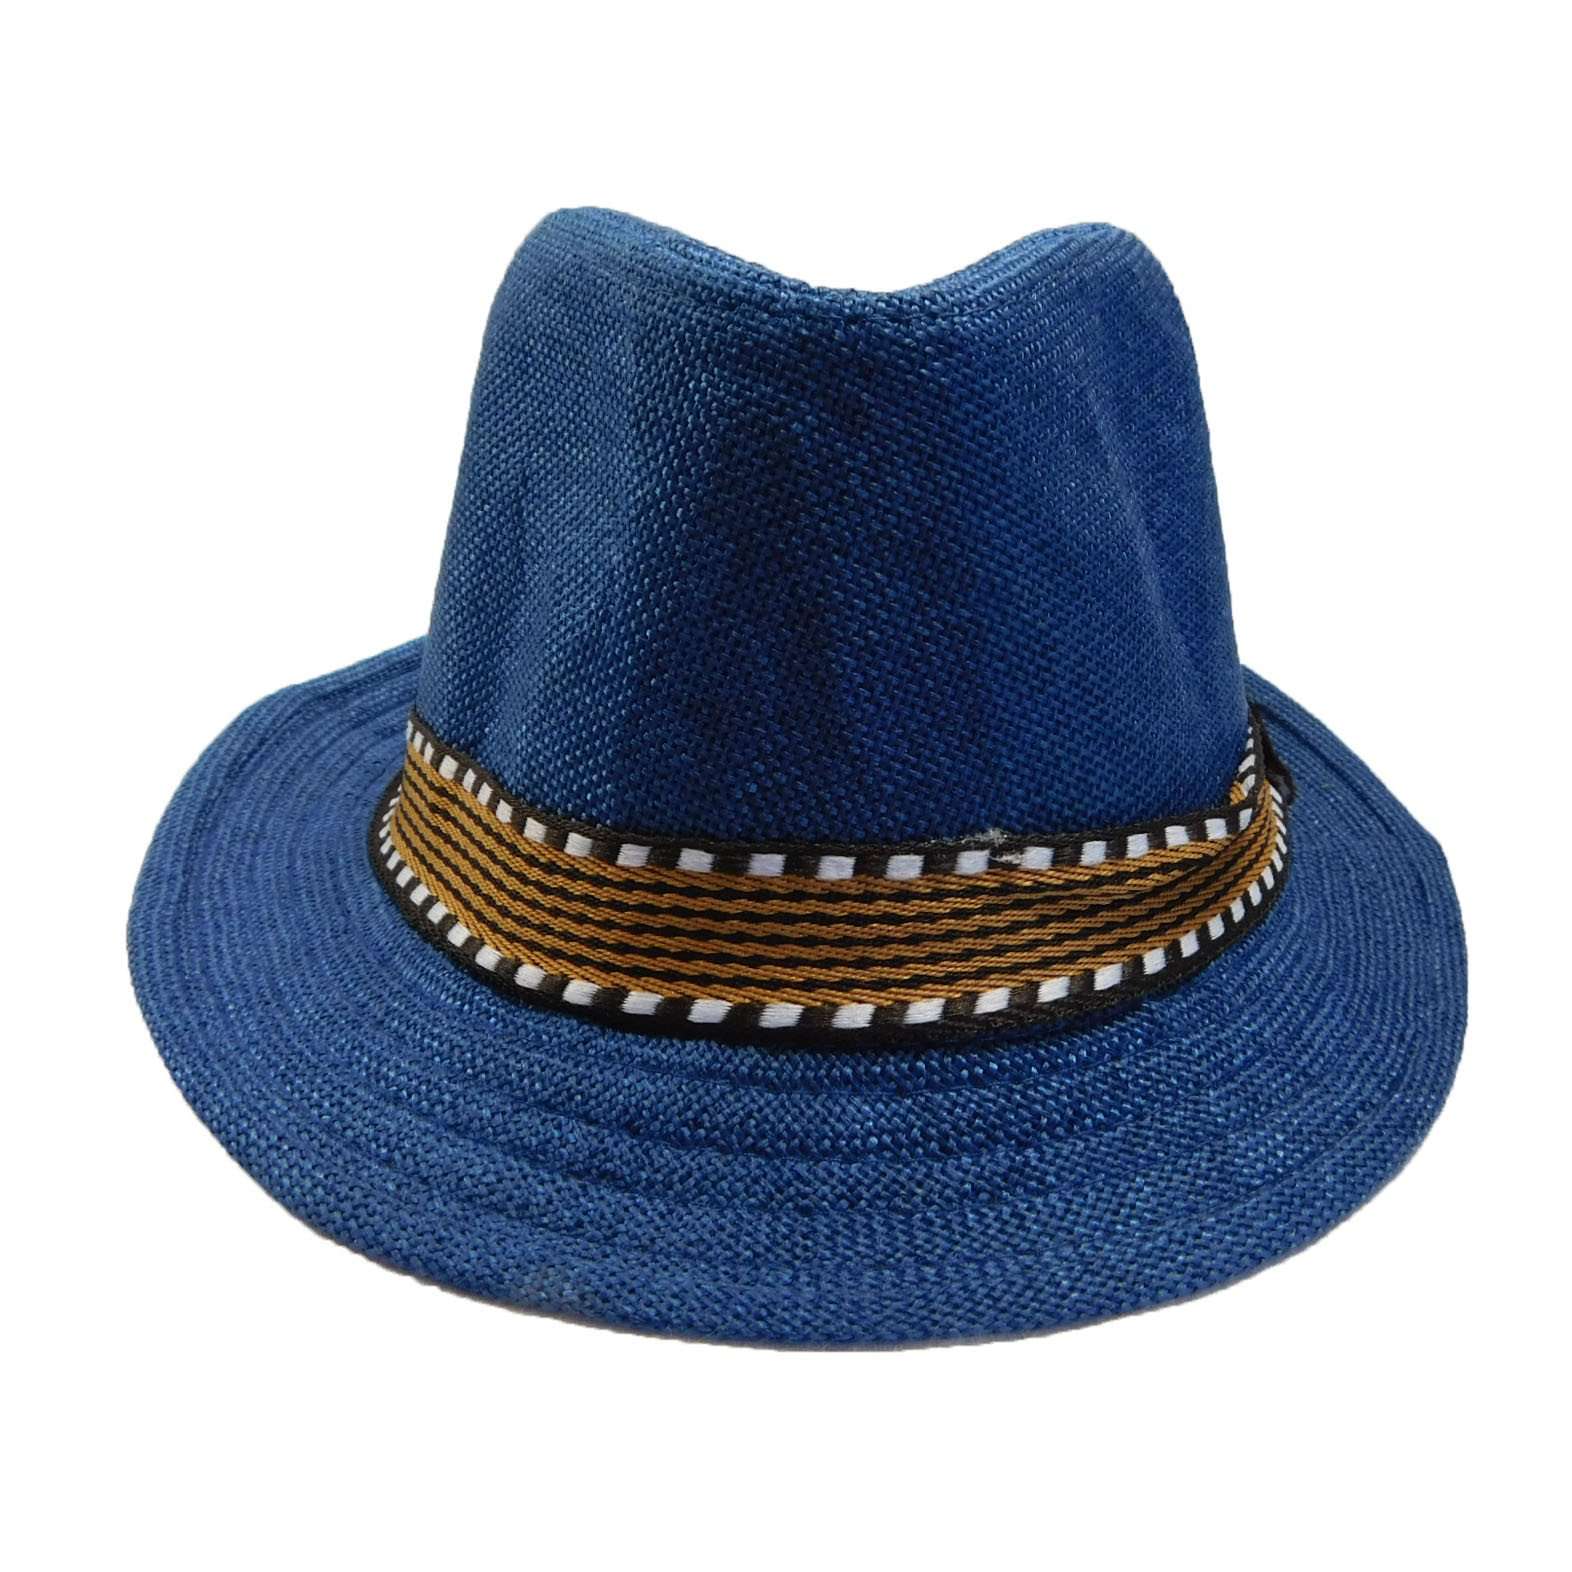 Kid's Fedora Hat with Pattern Band - Blue Fedora Hat Boardwalk Style Hats    